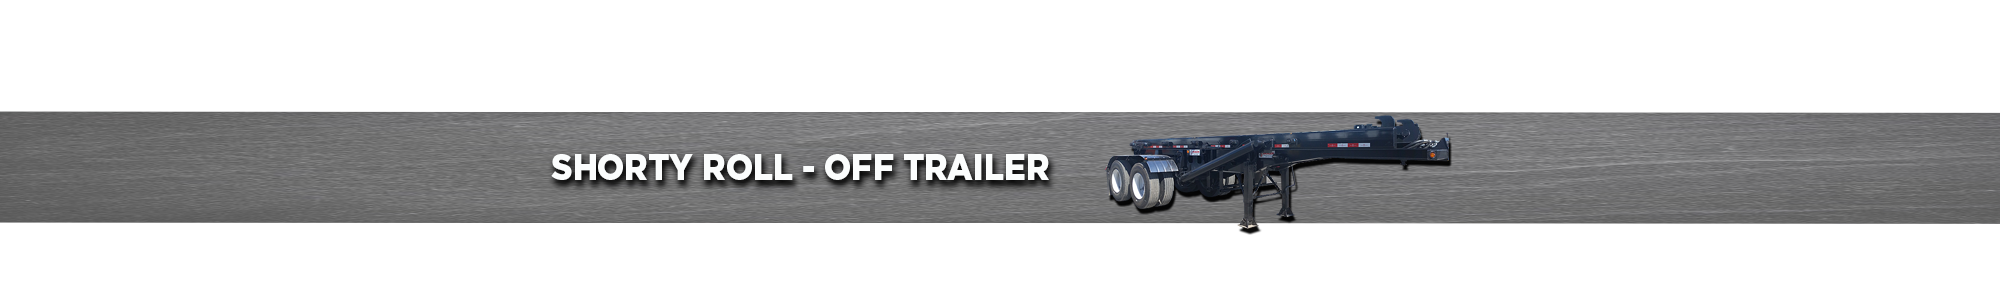 Shorty Roll-Off Trailer